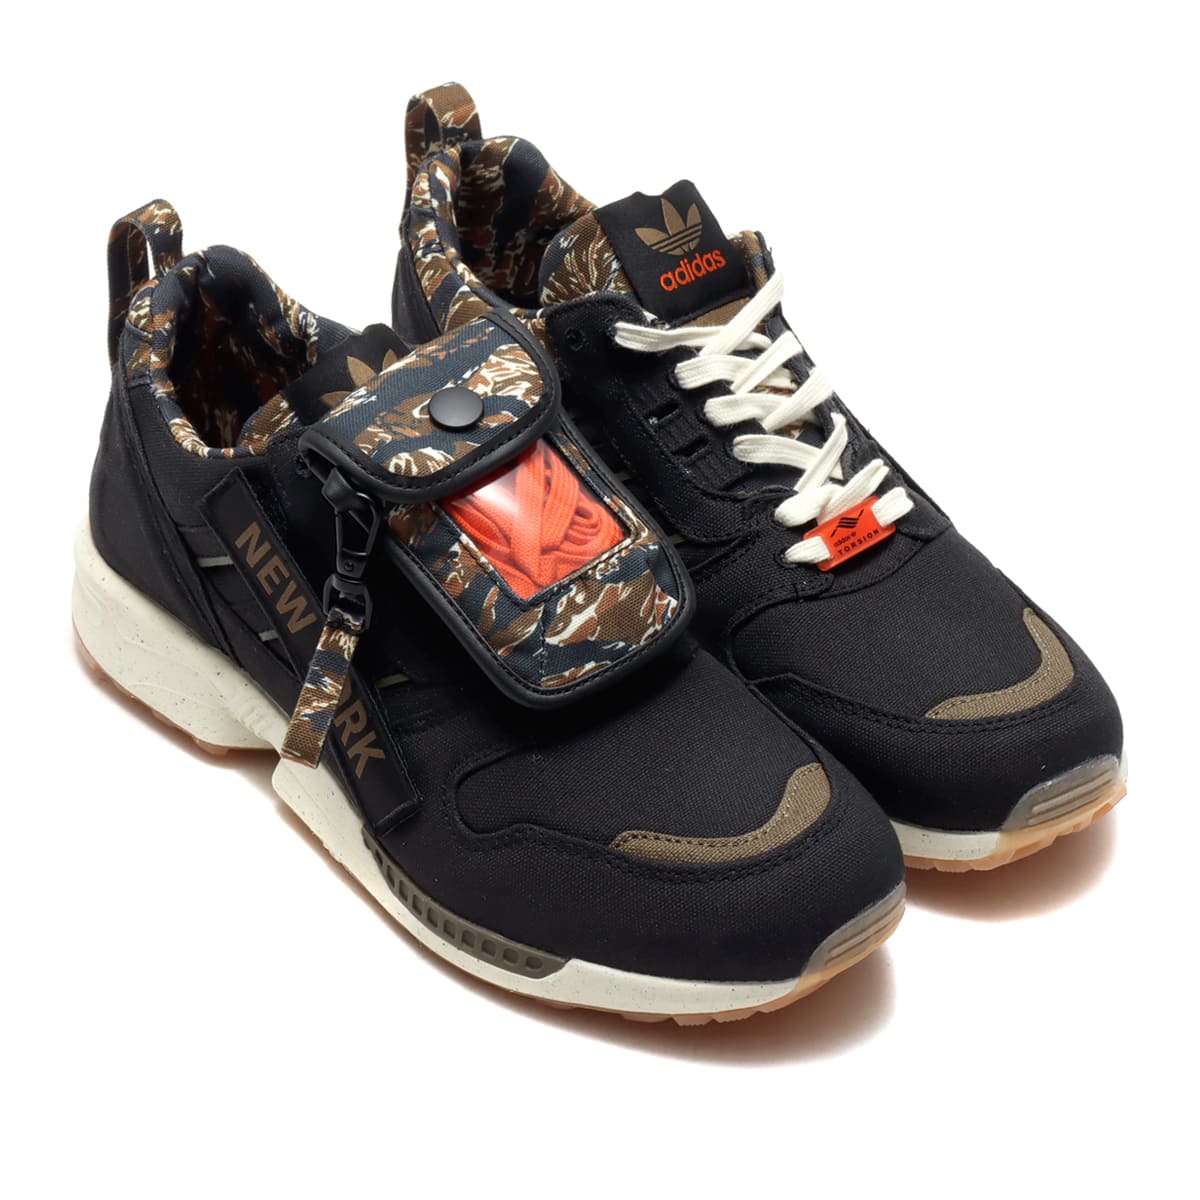 adidas ZX 8000 OUT THERE CORE BLACK/COLLEGIATE ORANGE/GUM 2 21SS-I